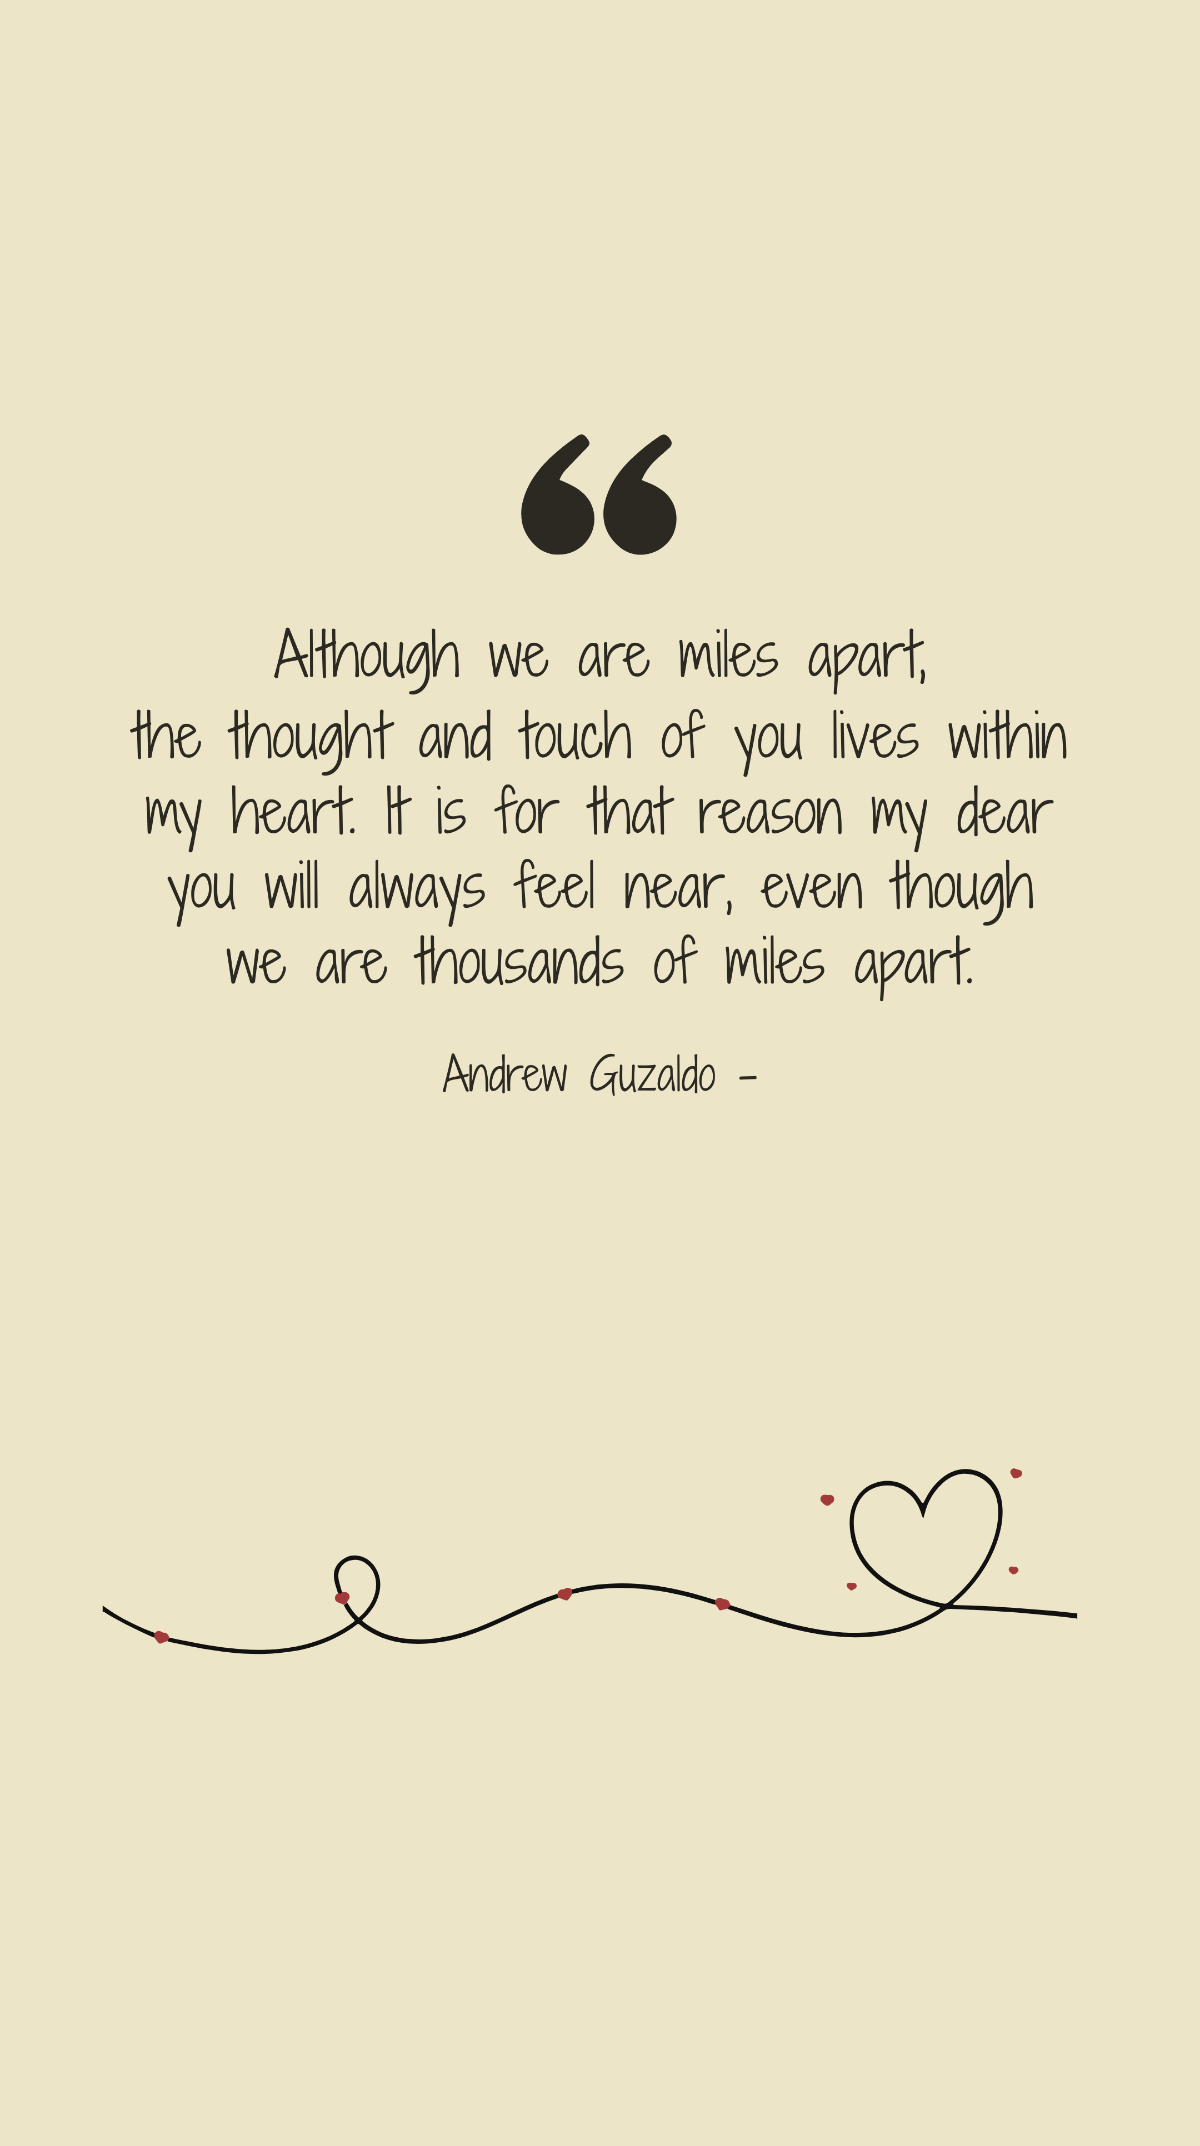 Free Andrew Guzaldo - Although we are miles apart, the thought and touch of you lives within my heart. It is for that reason my dear you will always feel near, even though we are thousands of miles apart. 